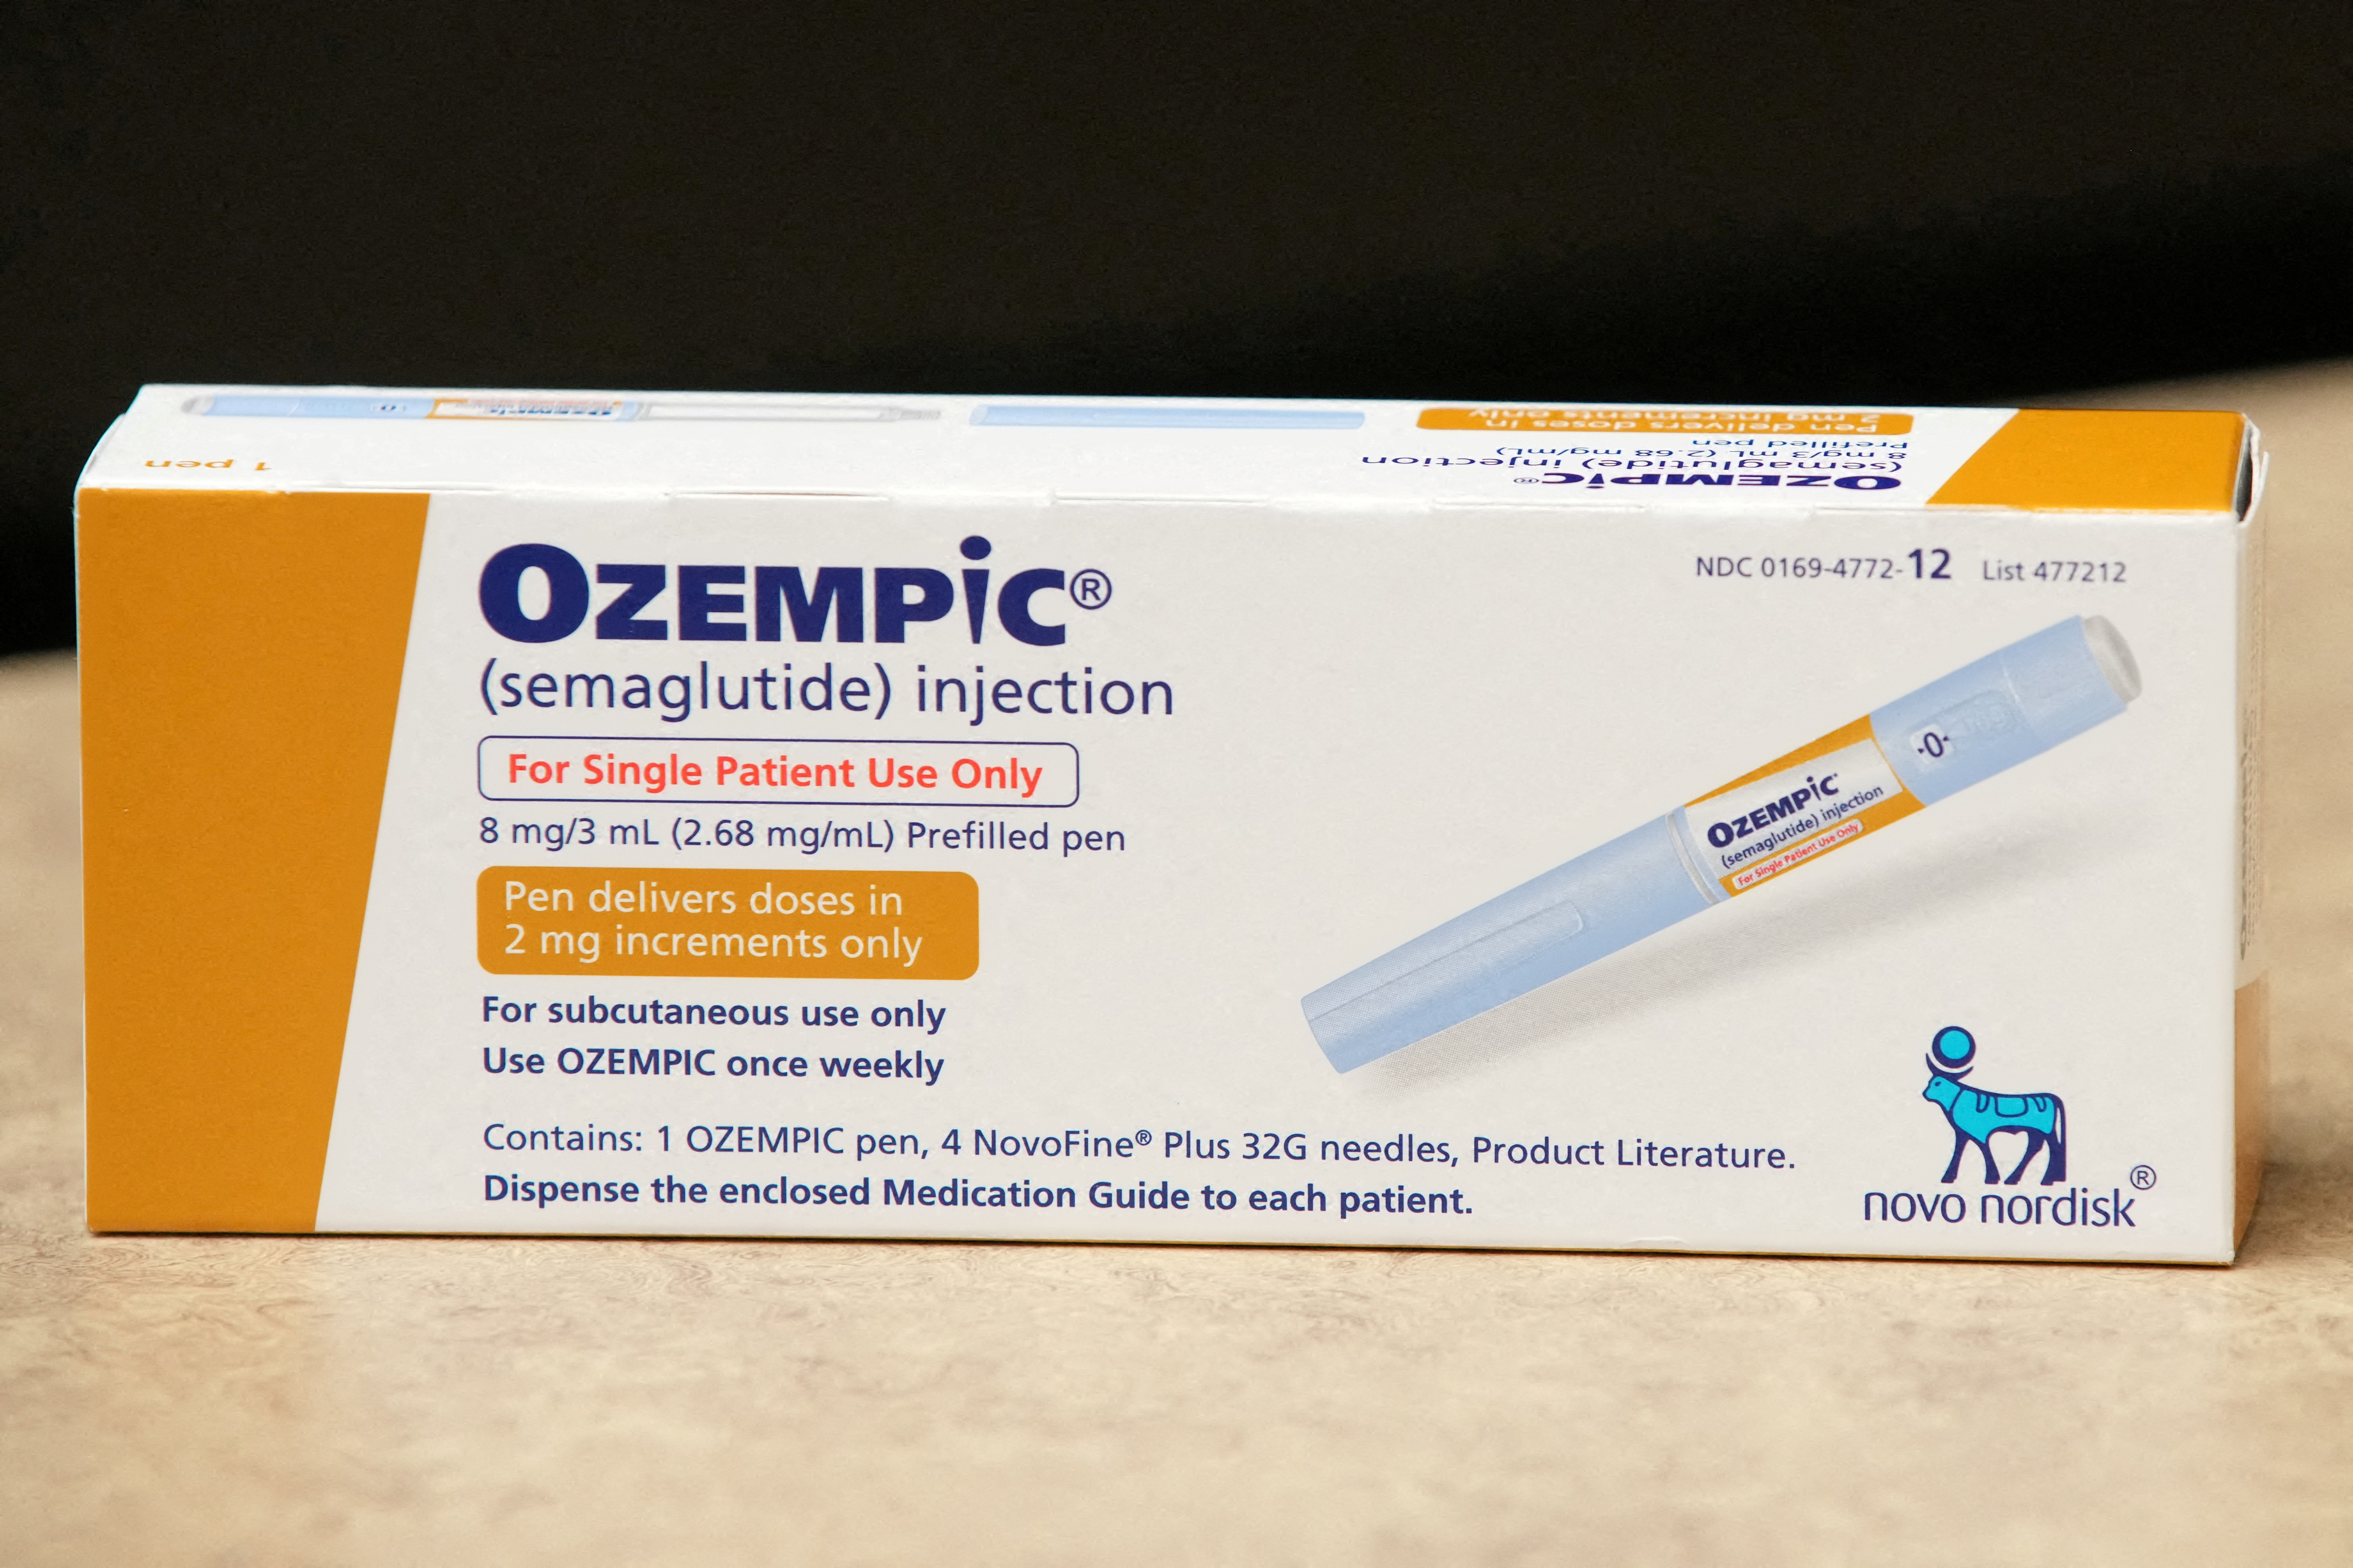 Ozempic is on display in a pharmacy in Provo